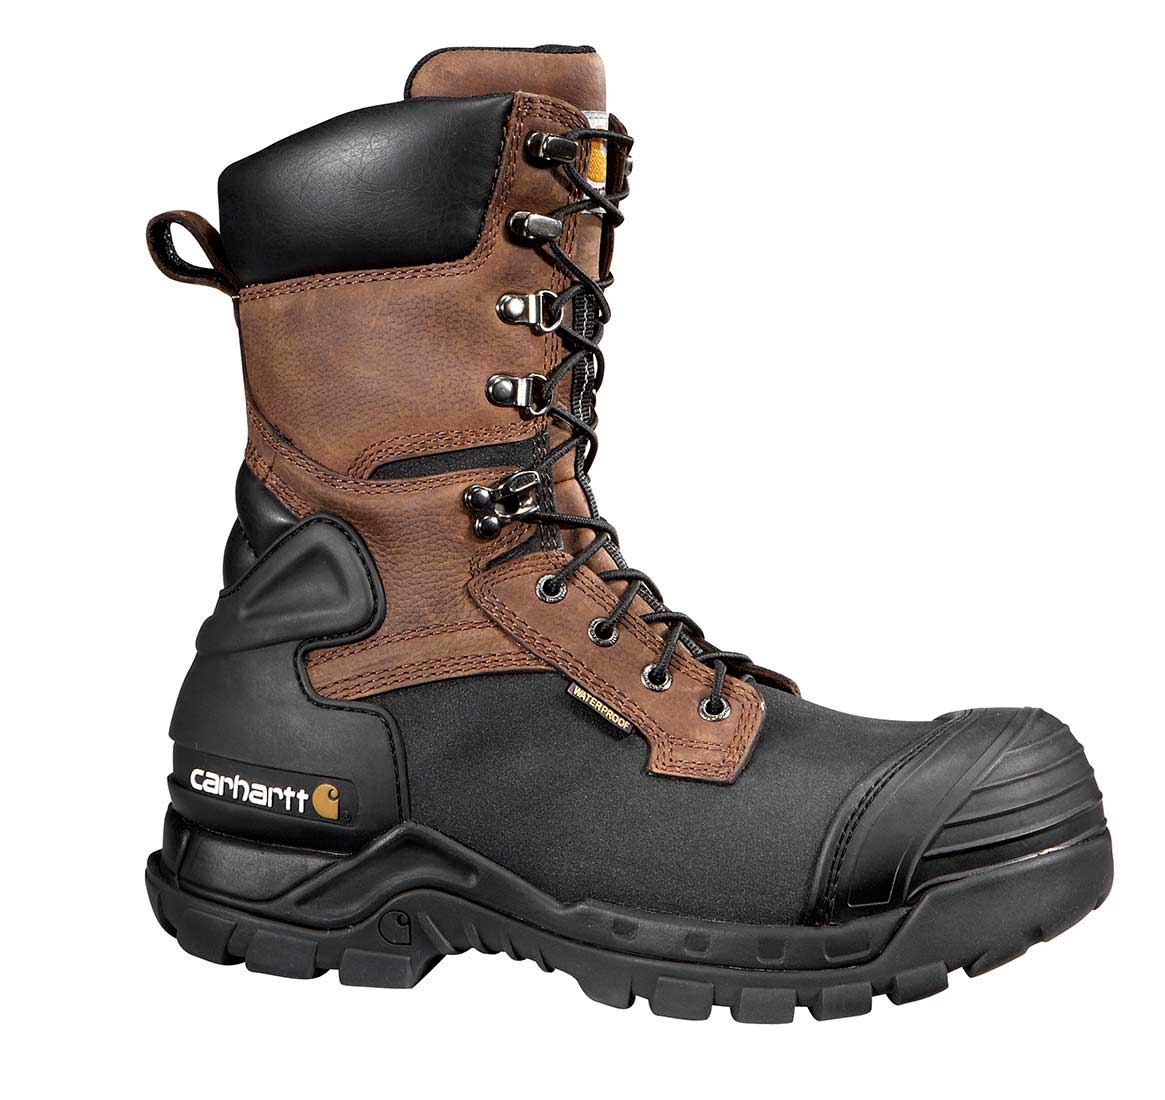 10 inch hiking boots